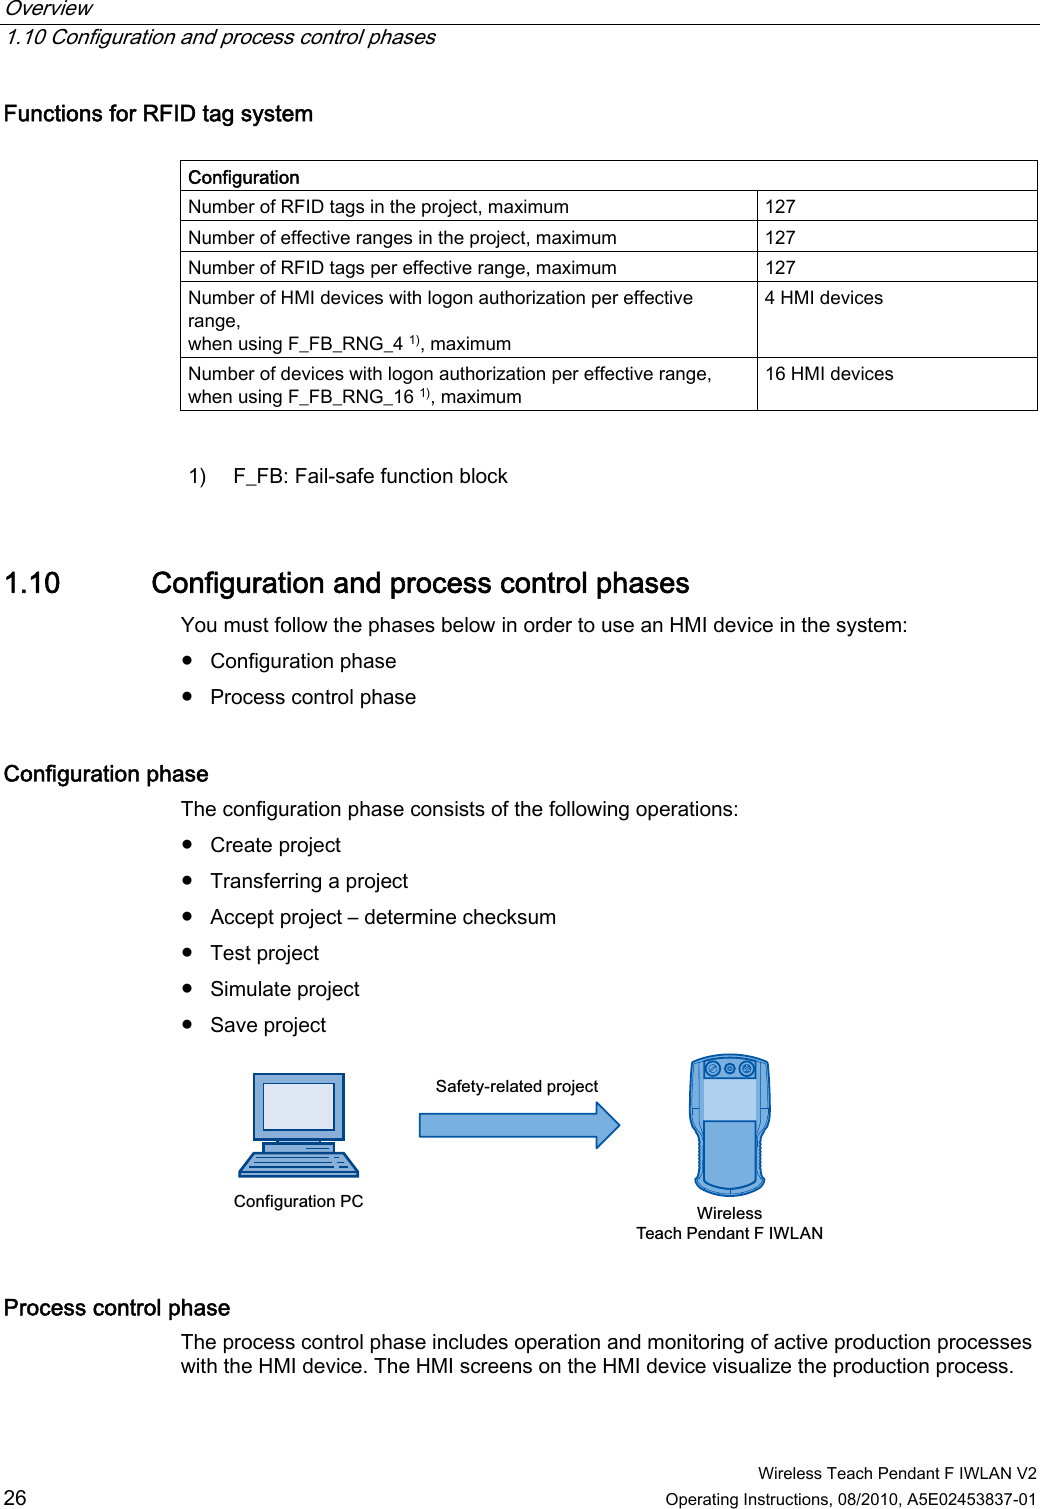 Overview   1.10 Configuration and process control phases  Wireless Teach Pendant F IWLAN V2 26 Operating Instructions, 08/2010, A5E02453837-01 Functions for RFID tag system   Configuration Number of RFID tags in the project, maximum  127 Number of effective ranges in the project, maximum  127 Number of RFID tags per effective range, maximum  127 Number of HMI devices with logon authorization per effective range, when using F_FB_RNG_4 1), maximum 4 HMI devices Number of devices with logon authorization per effective range, when using F_FB_RNG_16 1), maximum 16 HMI devices   1)  F_FB: Fail-safe function block 1.10 Configuration and process control phases You must follow the phases below in order to use an HMI device in the system: ●  Configuration phase ●  Process control phase Configuration phase  The configuration phase consists of the following operations: ●  Create project ●  Transferring a project ●  Accept project – determine checksum ●  Test project ●  Simulate project ●  Save project &amp;RQILJXUDWLRQ3&amp;6DIHW\UHODWHGSURMHFW:LUHOHVV7HDFK3HQGDQW),:/$1 Process control phase The process control phase includes operation and monitoring of active production processes with the HMI device. The HMI screens on the HMI device visualize the production process. PRELIMINARY II 1.7.2010